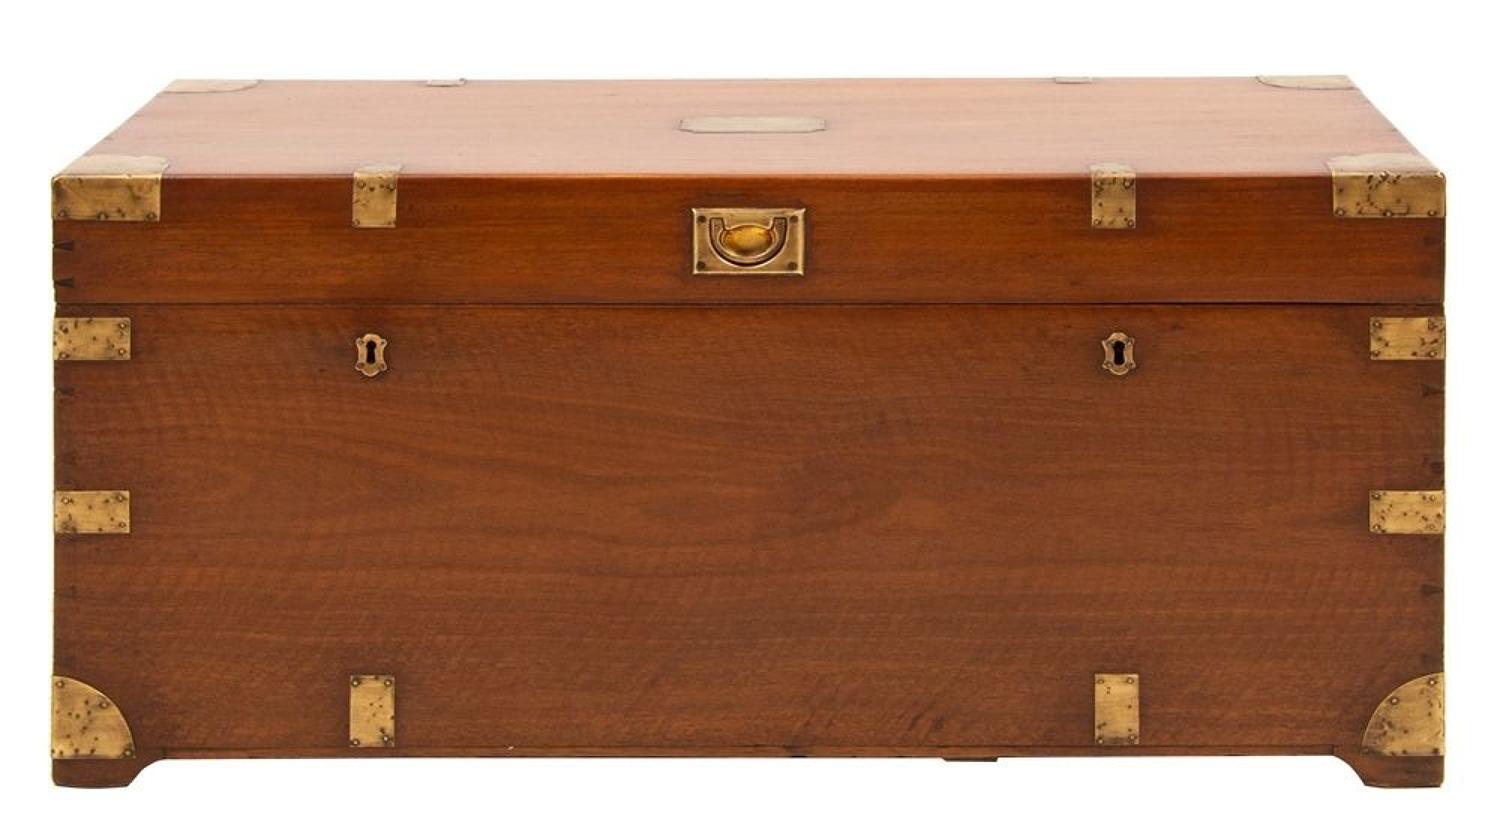 Military Campaign Trunk